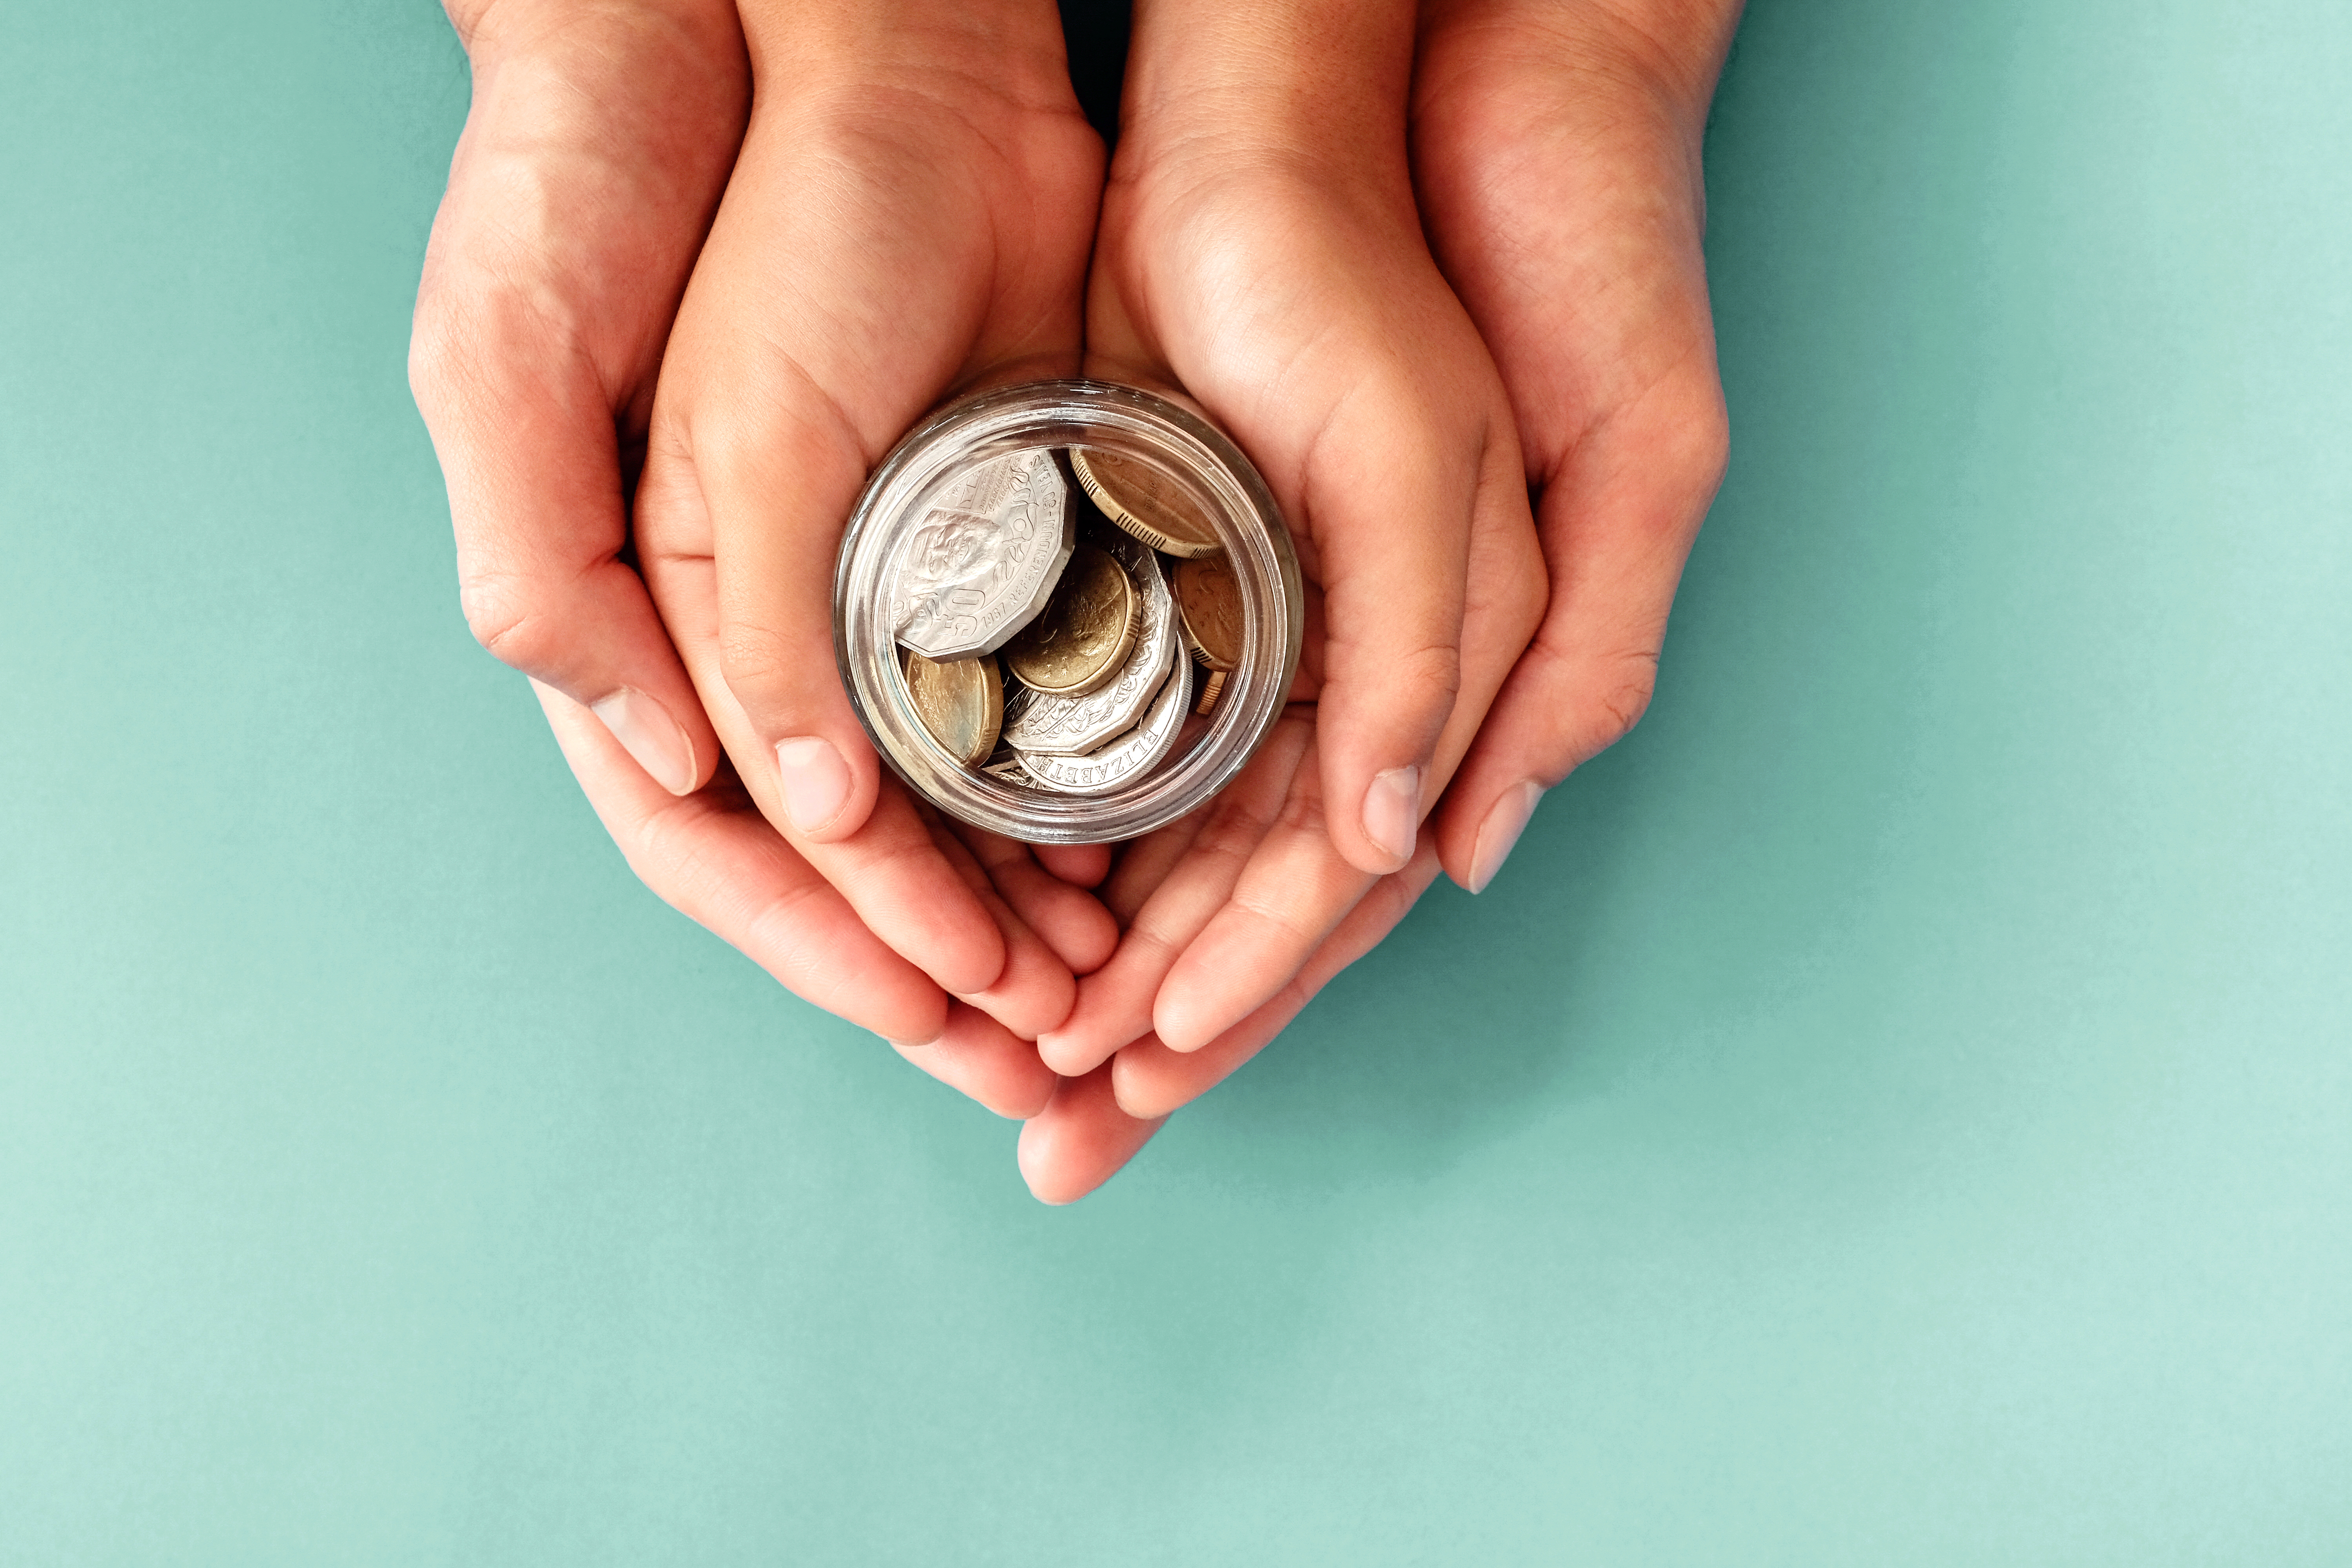 child and parent hands holding money jar, donation, saving, family finance plan concept